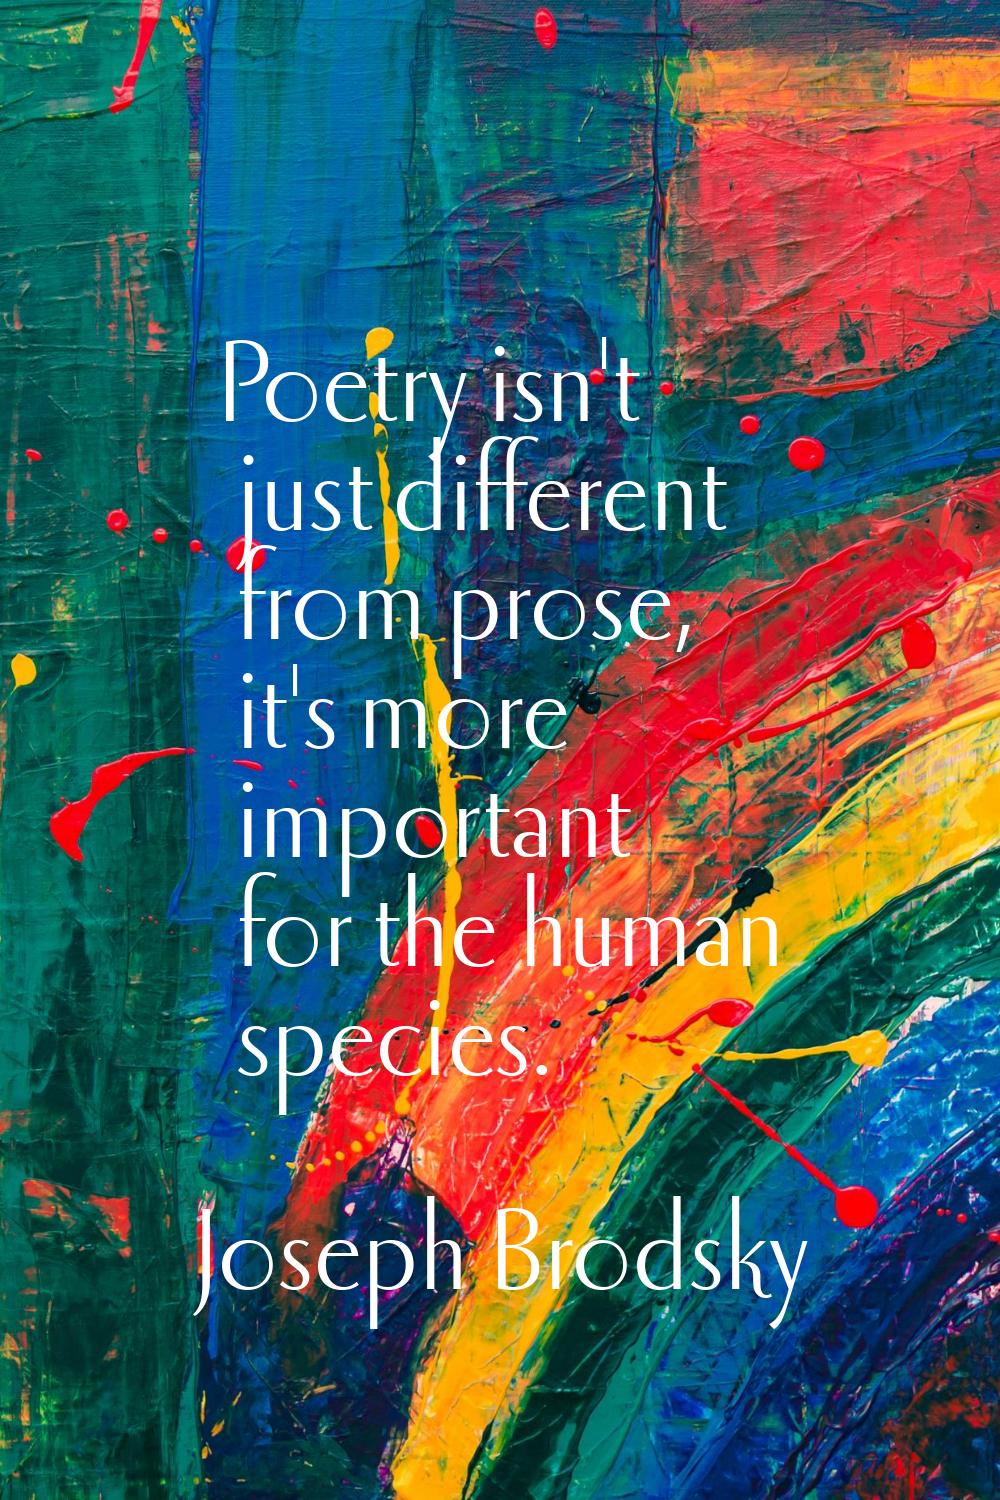 Poetry isn't just different from prose, it's more important for the human species.